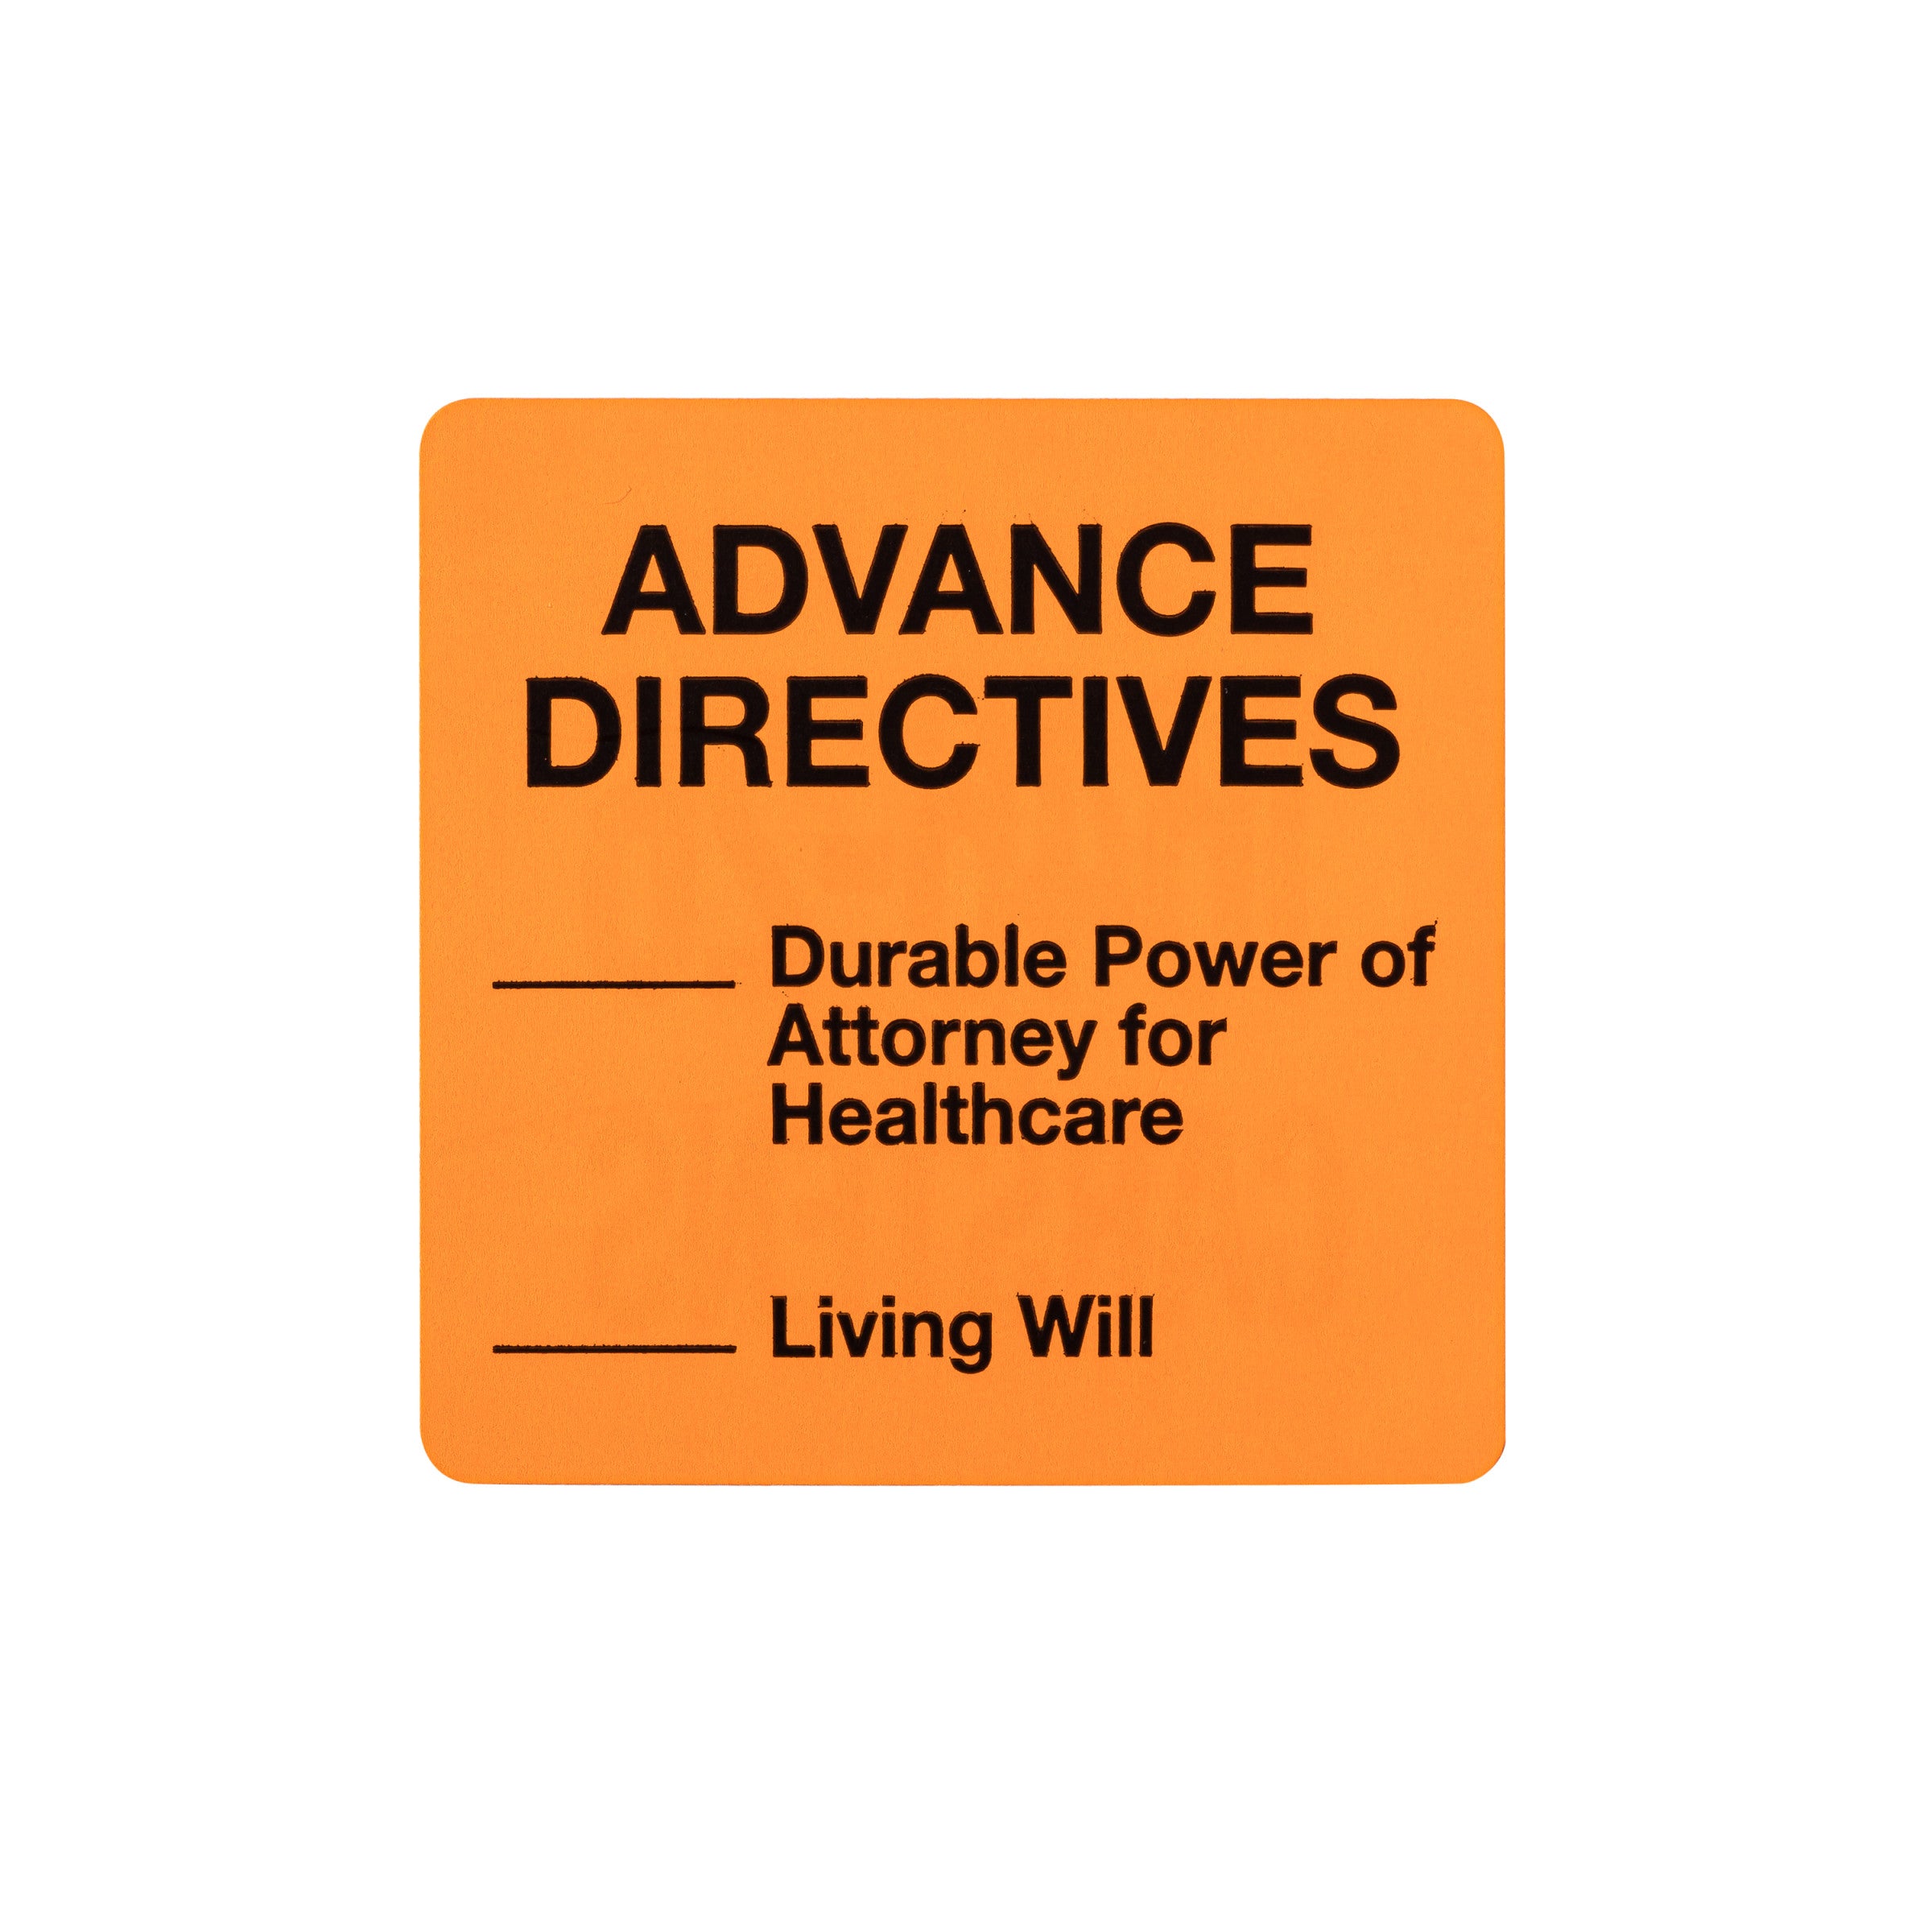 Advance Directives Alert and Instruction Labels, Orange, W2.5" x H.2.5" (Roll of 100)